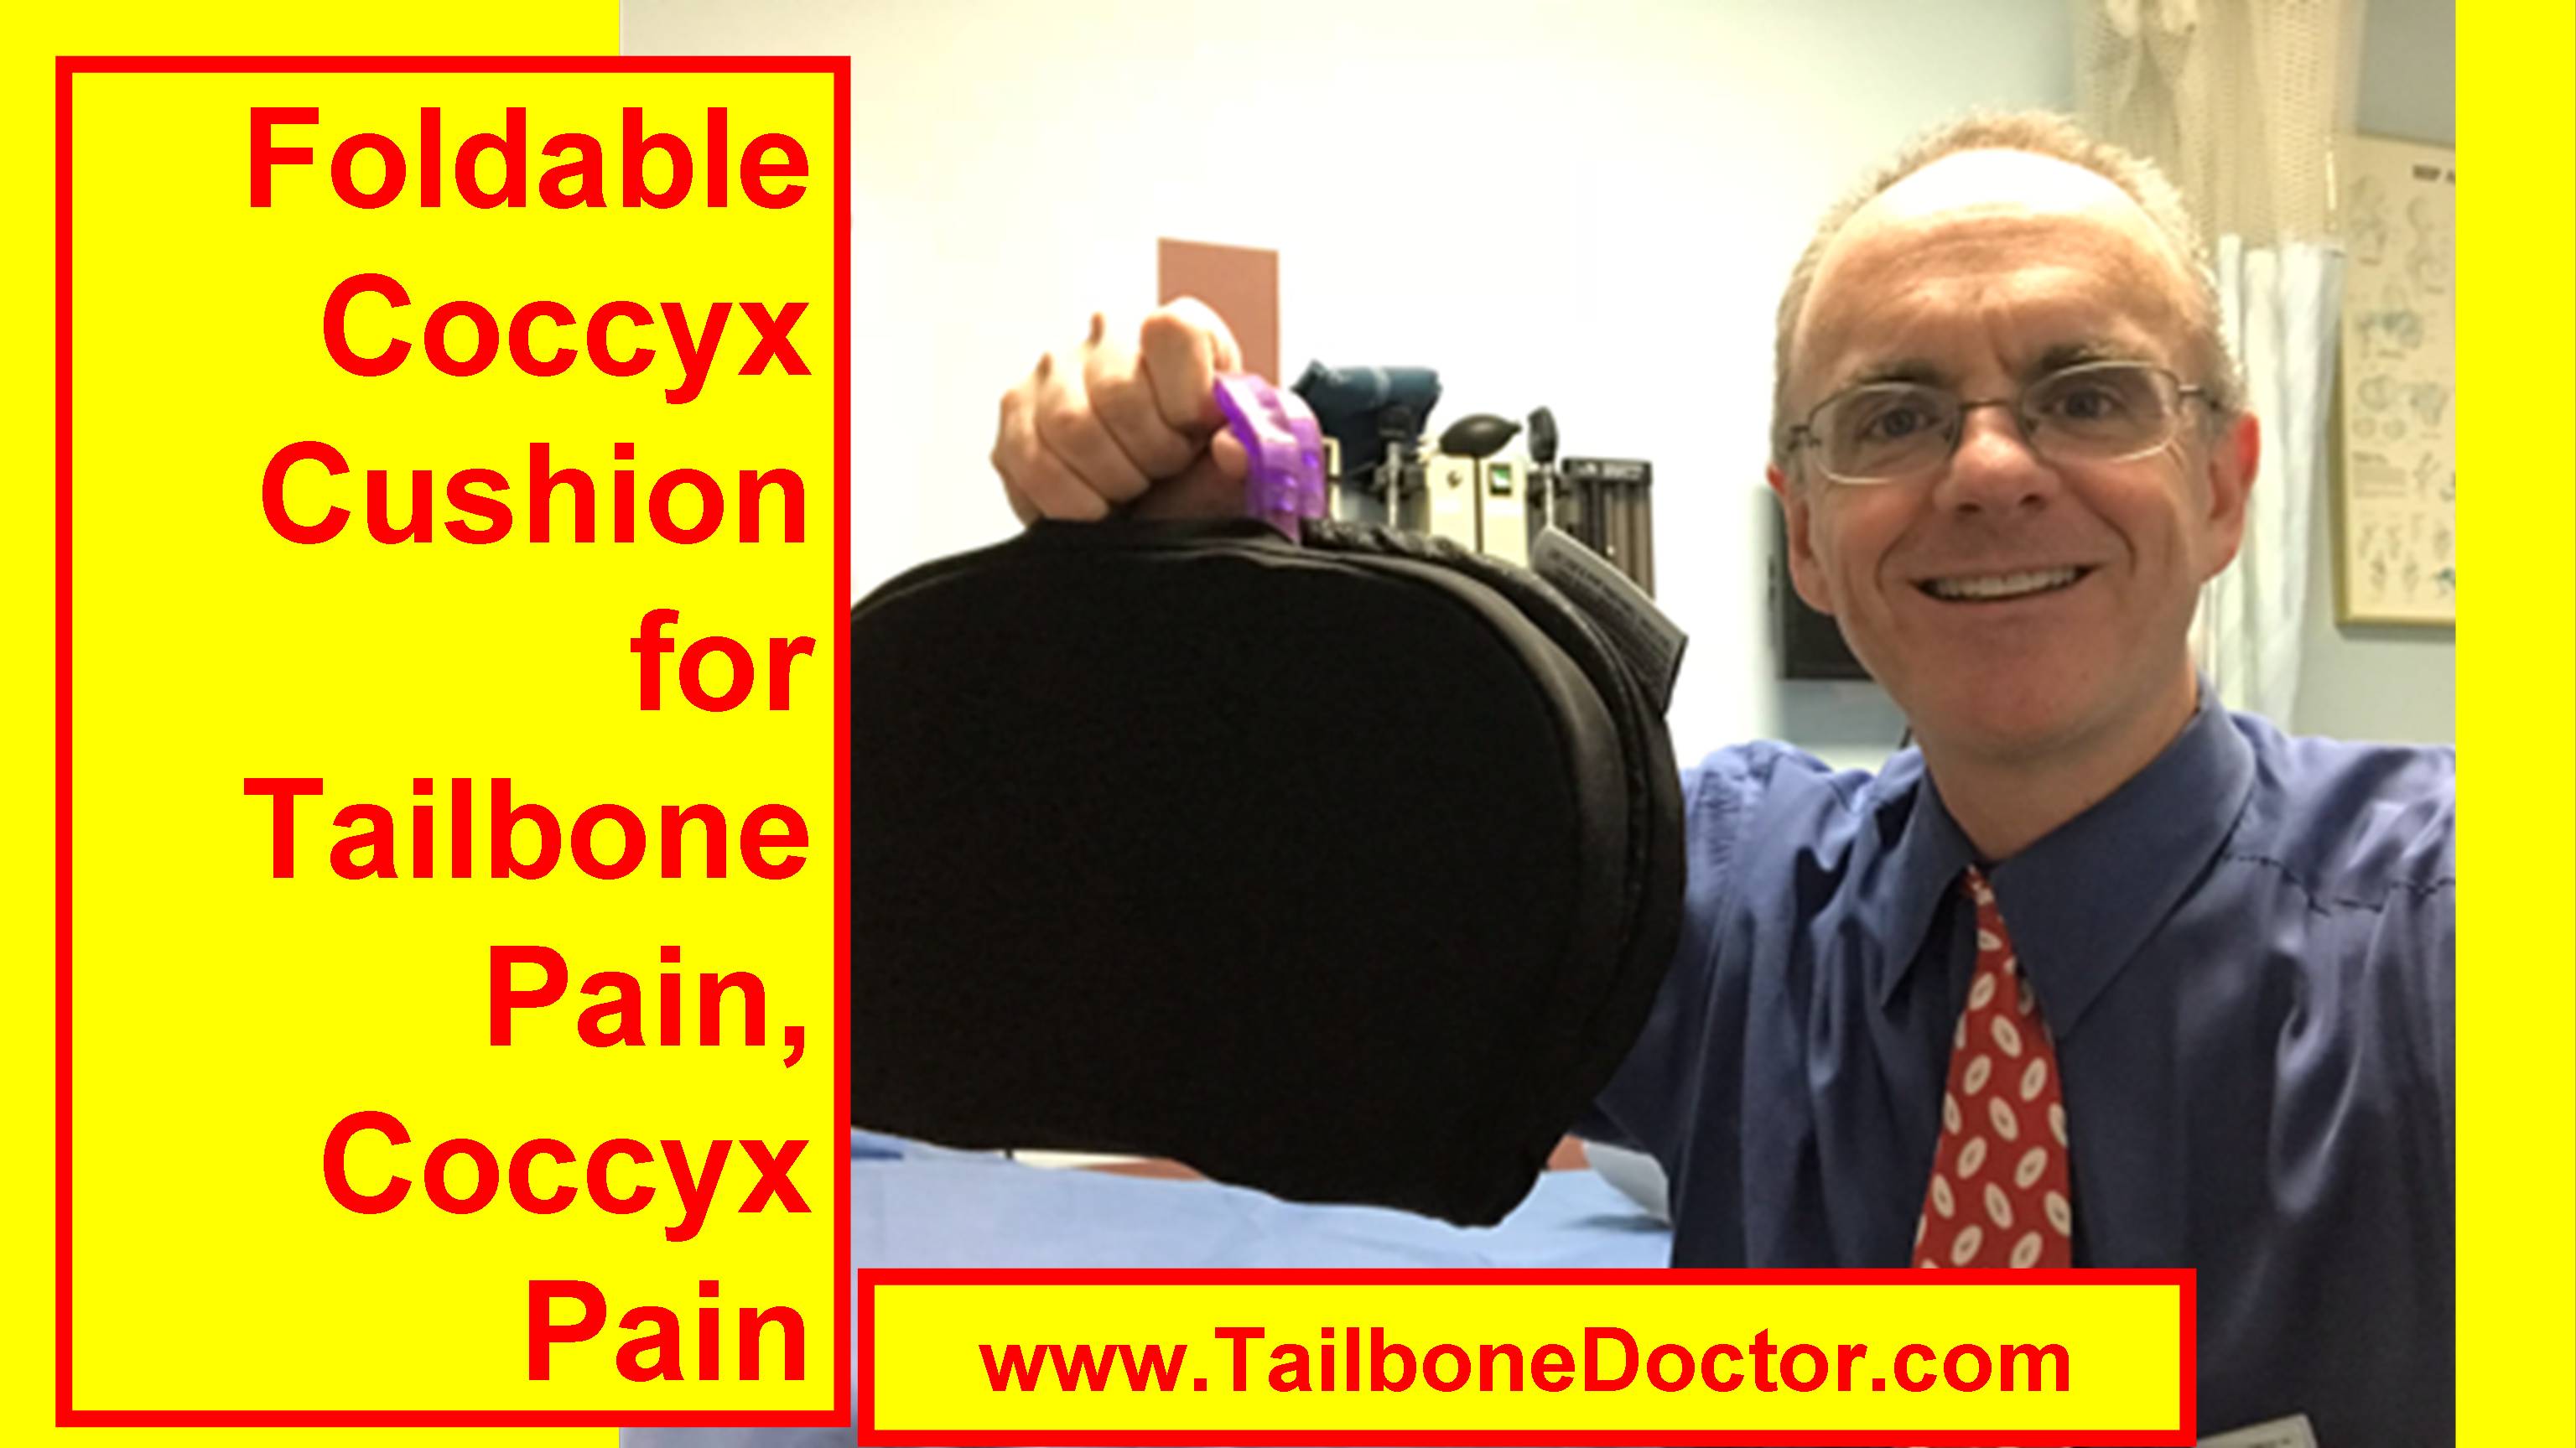 https://tailbonedoctor.com/wp-content/uploads/2018/01/Foldable-Coccyx-Cushion-for-Tailbone-Pain-Coccyx-Pain.jpg